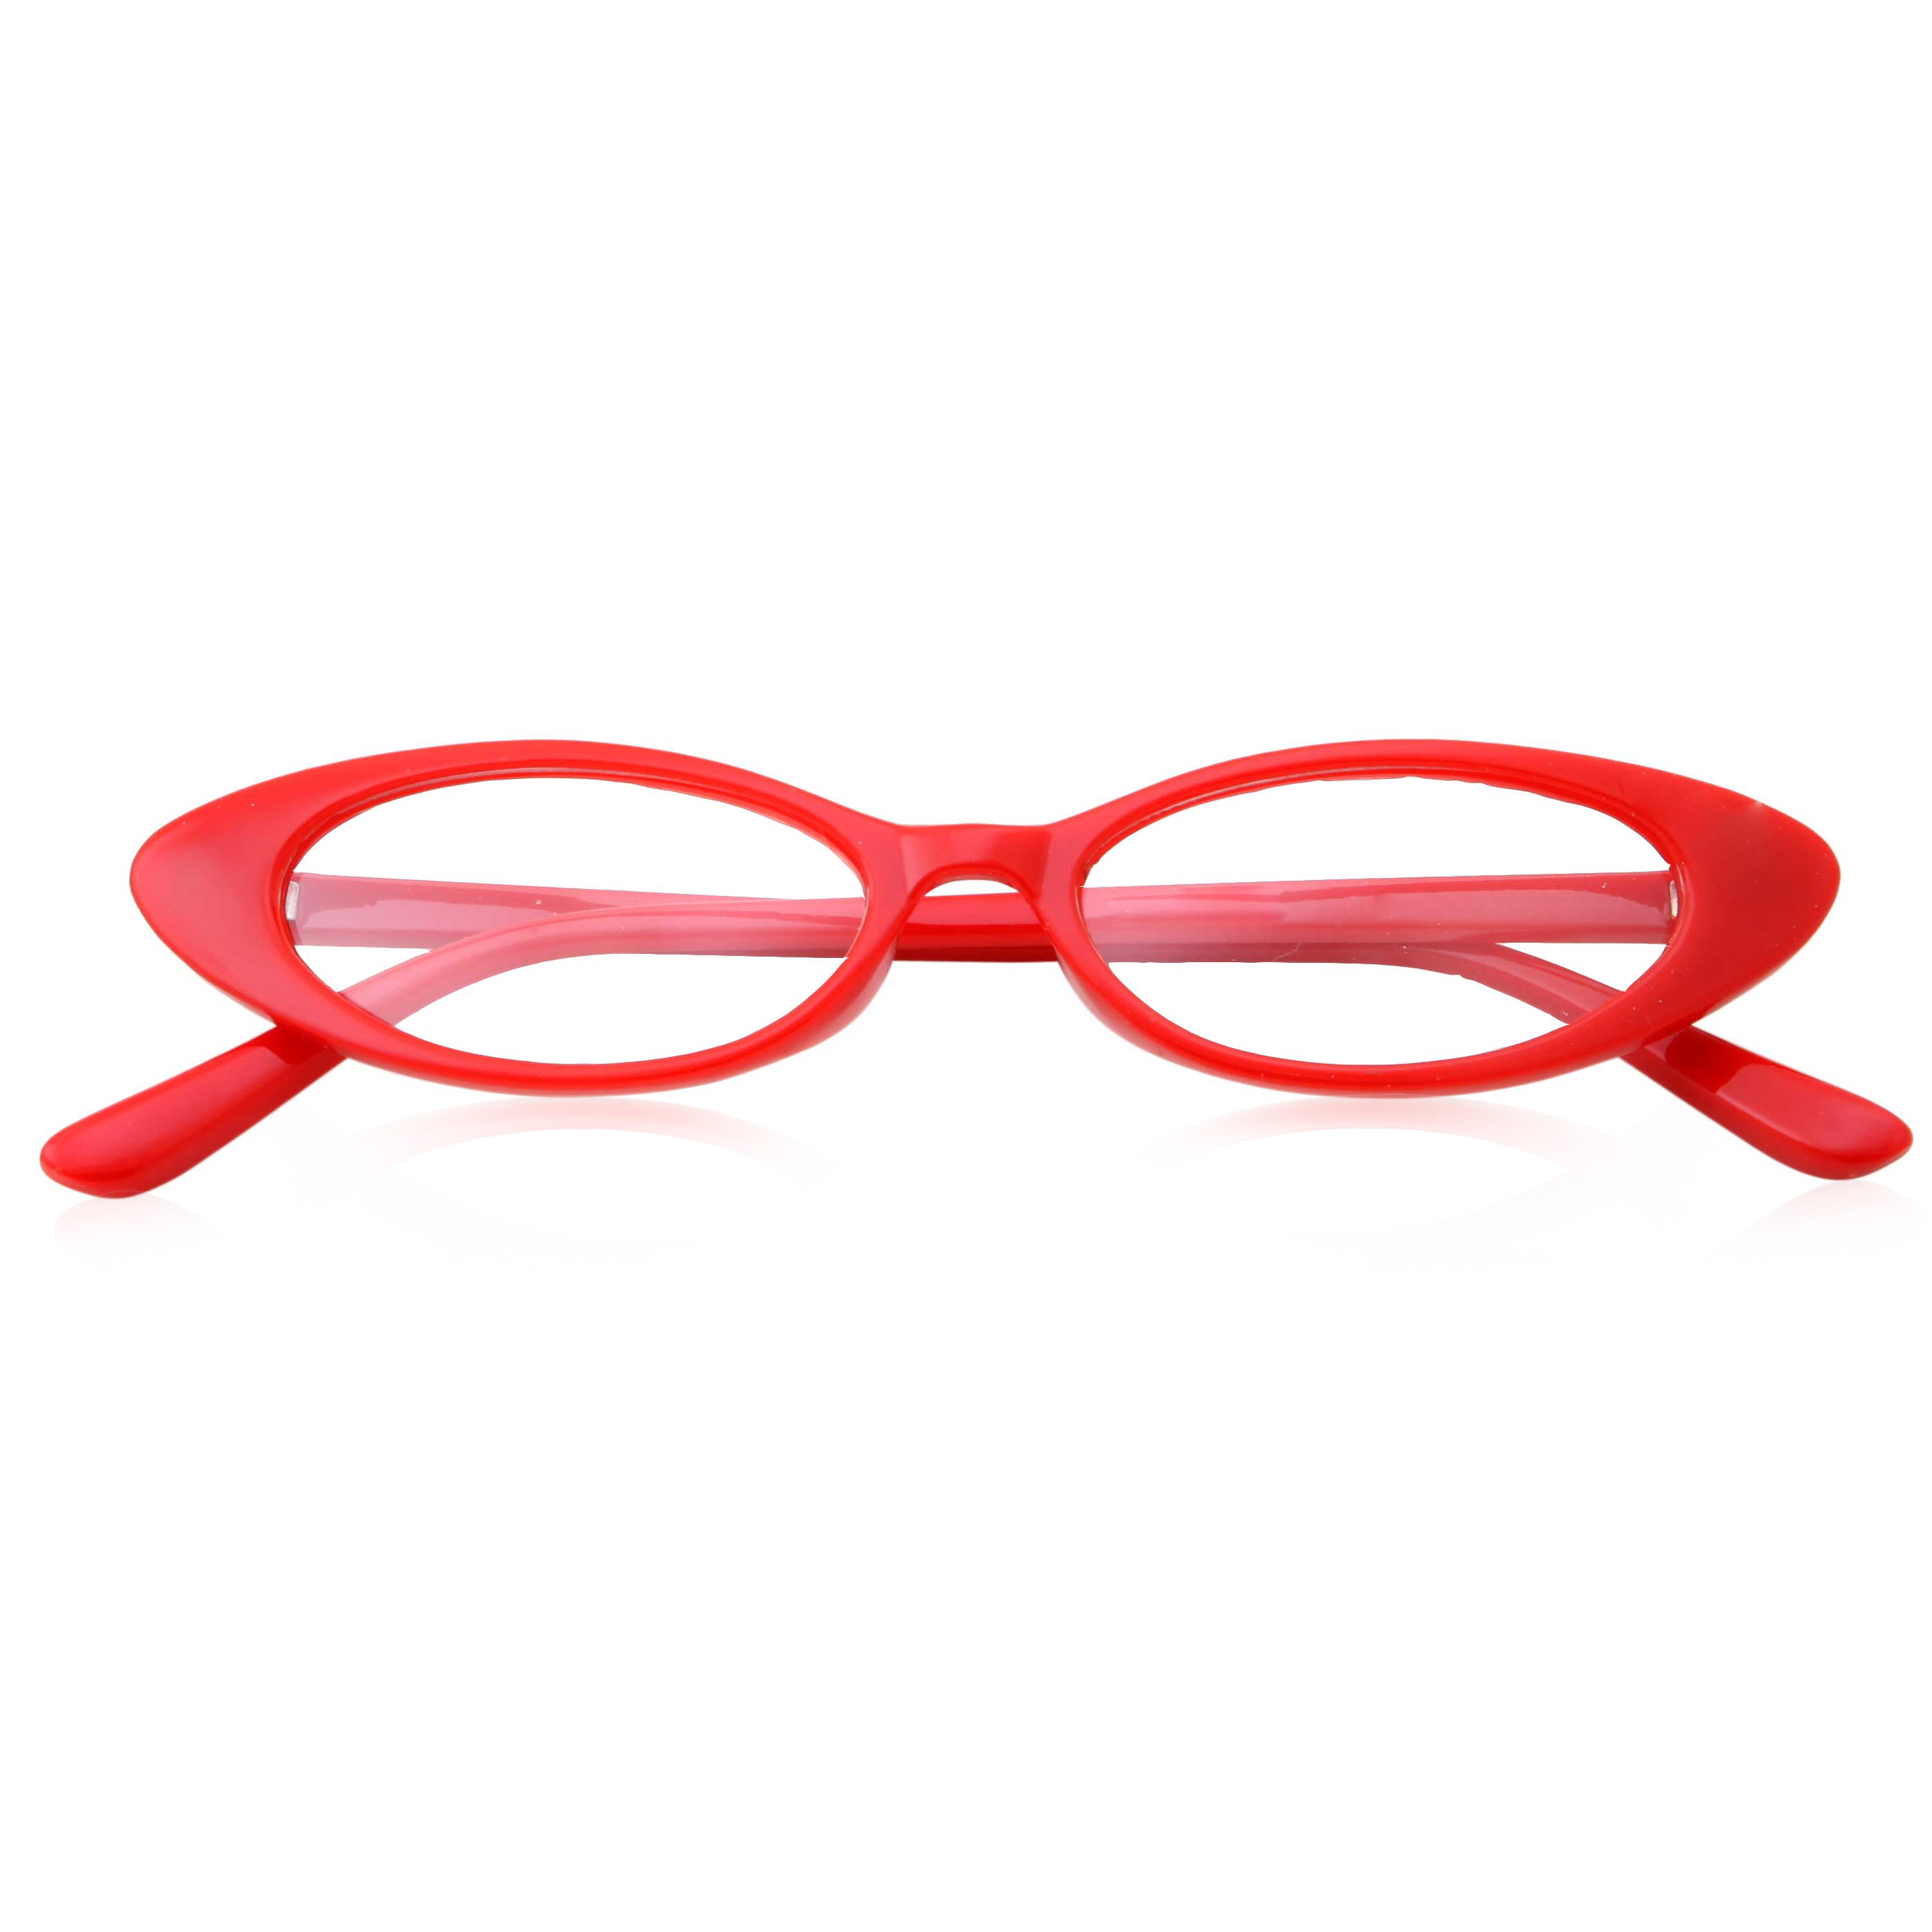 grinderPUNCH Retro 90s Red Slim Flat Clear Lens Cat Eye Sunglasses - image 2 of 5